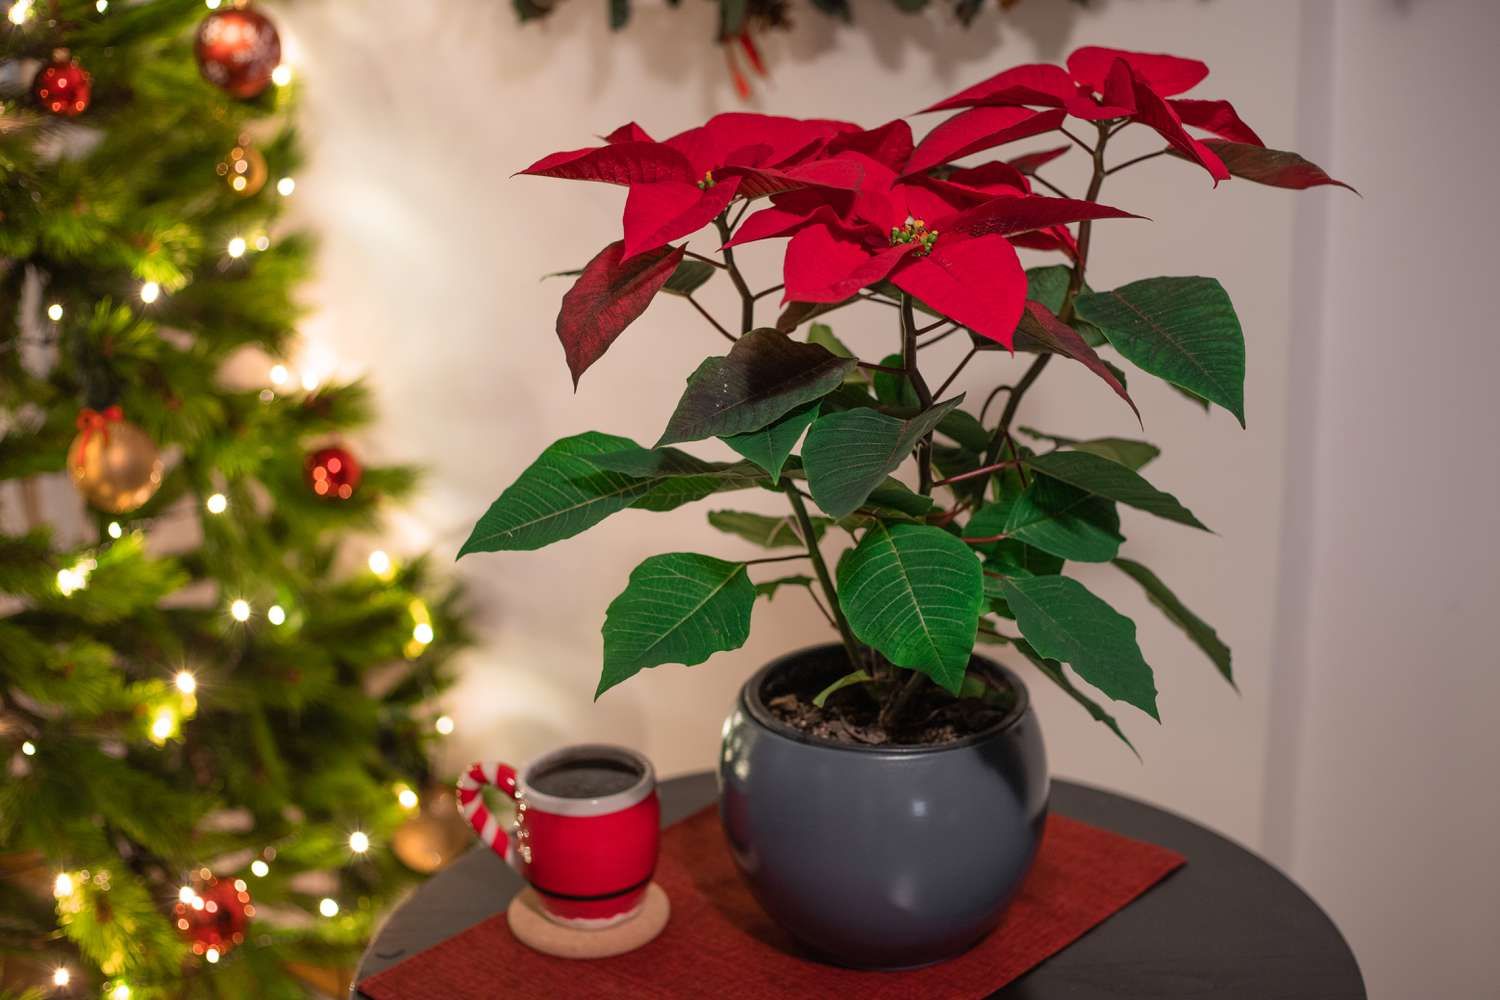 How To Store A Poinsettia